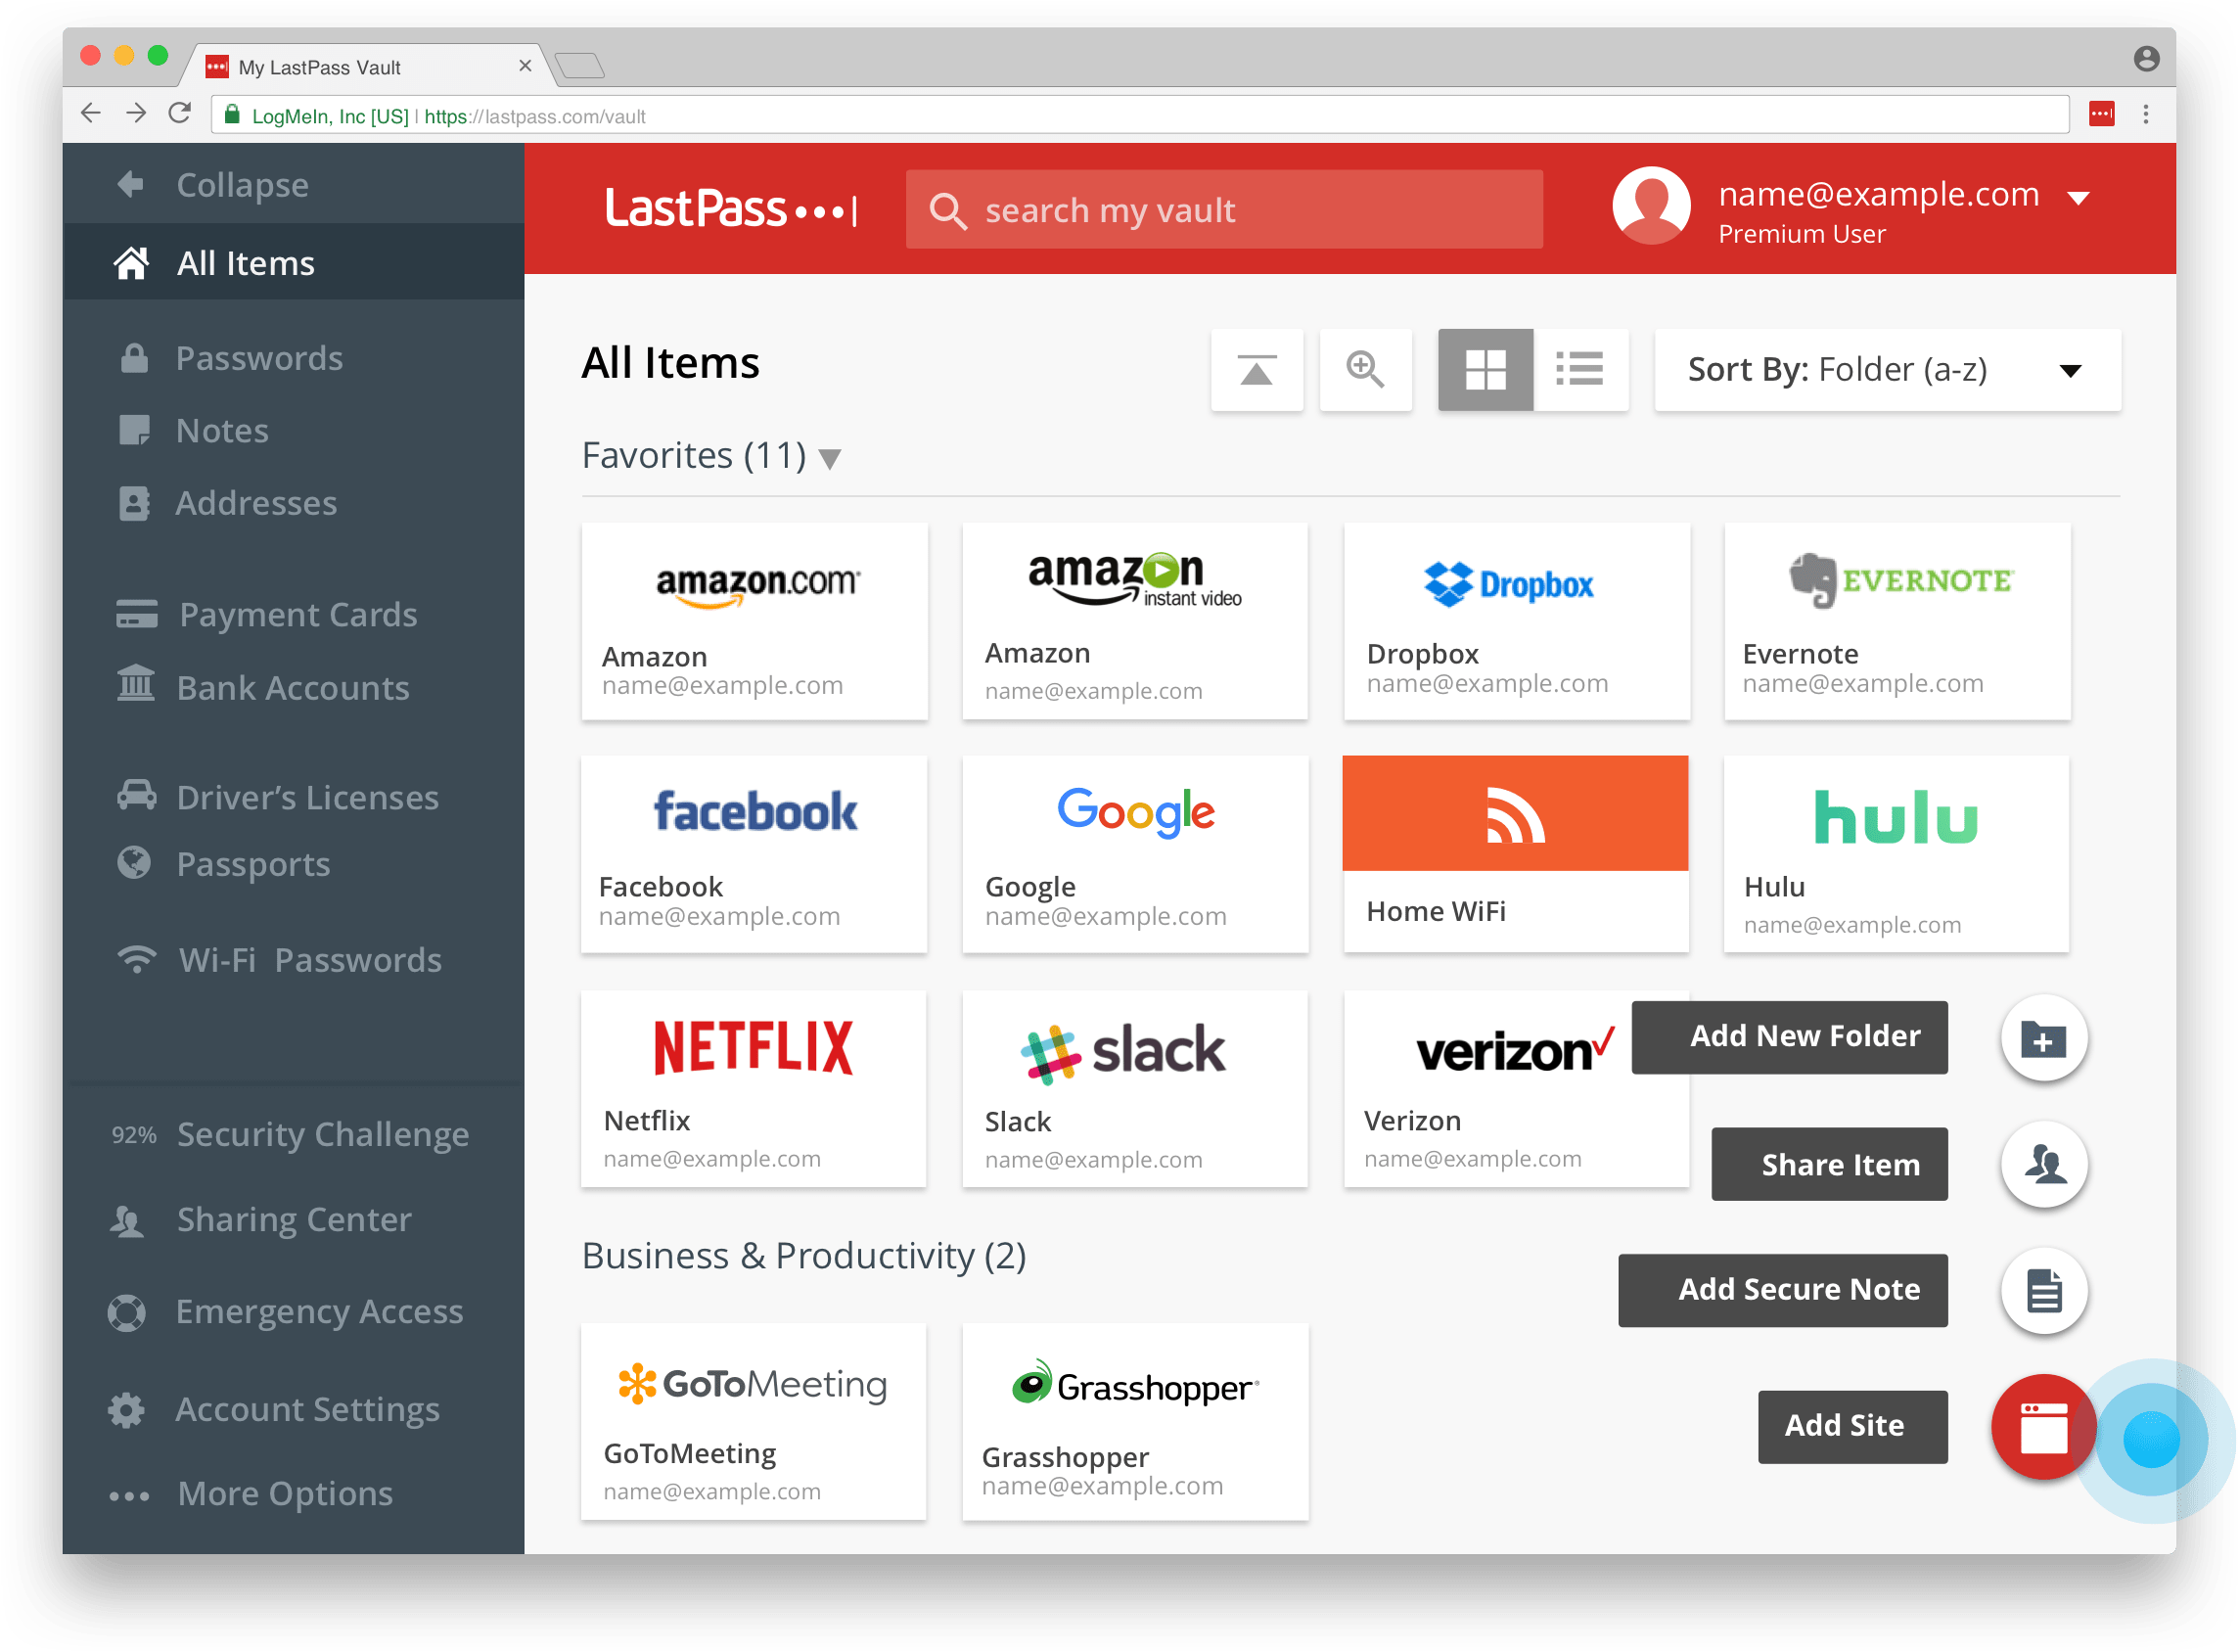 The LastPass Vault accessed through a web browser